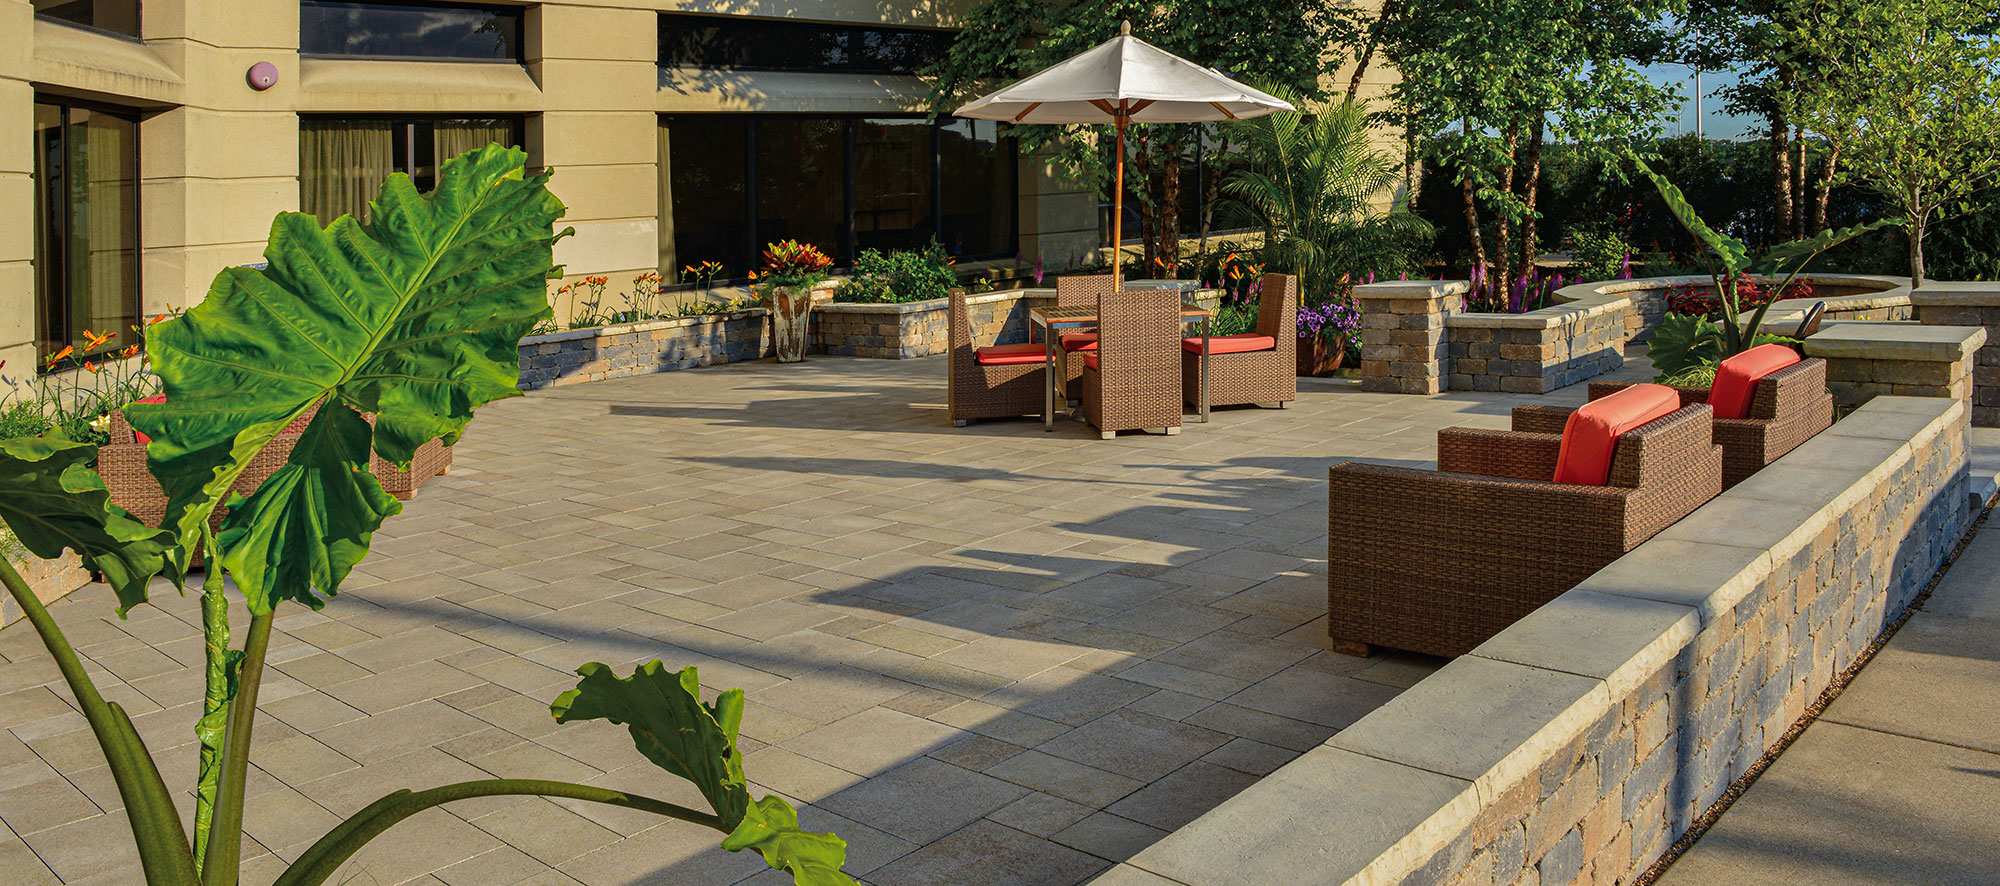 The warm, beige tones of Umbriano make up the main paver floor, with a small retaining wall and patio furniture strewn throughout the space.